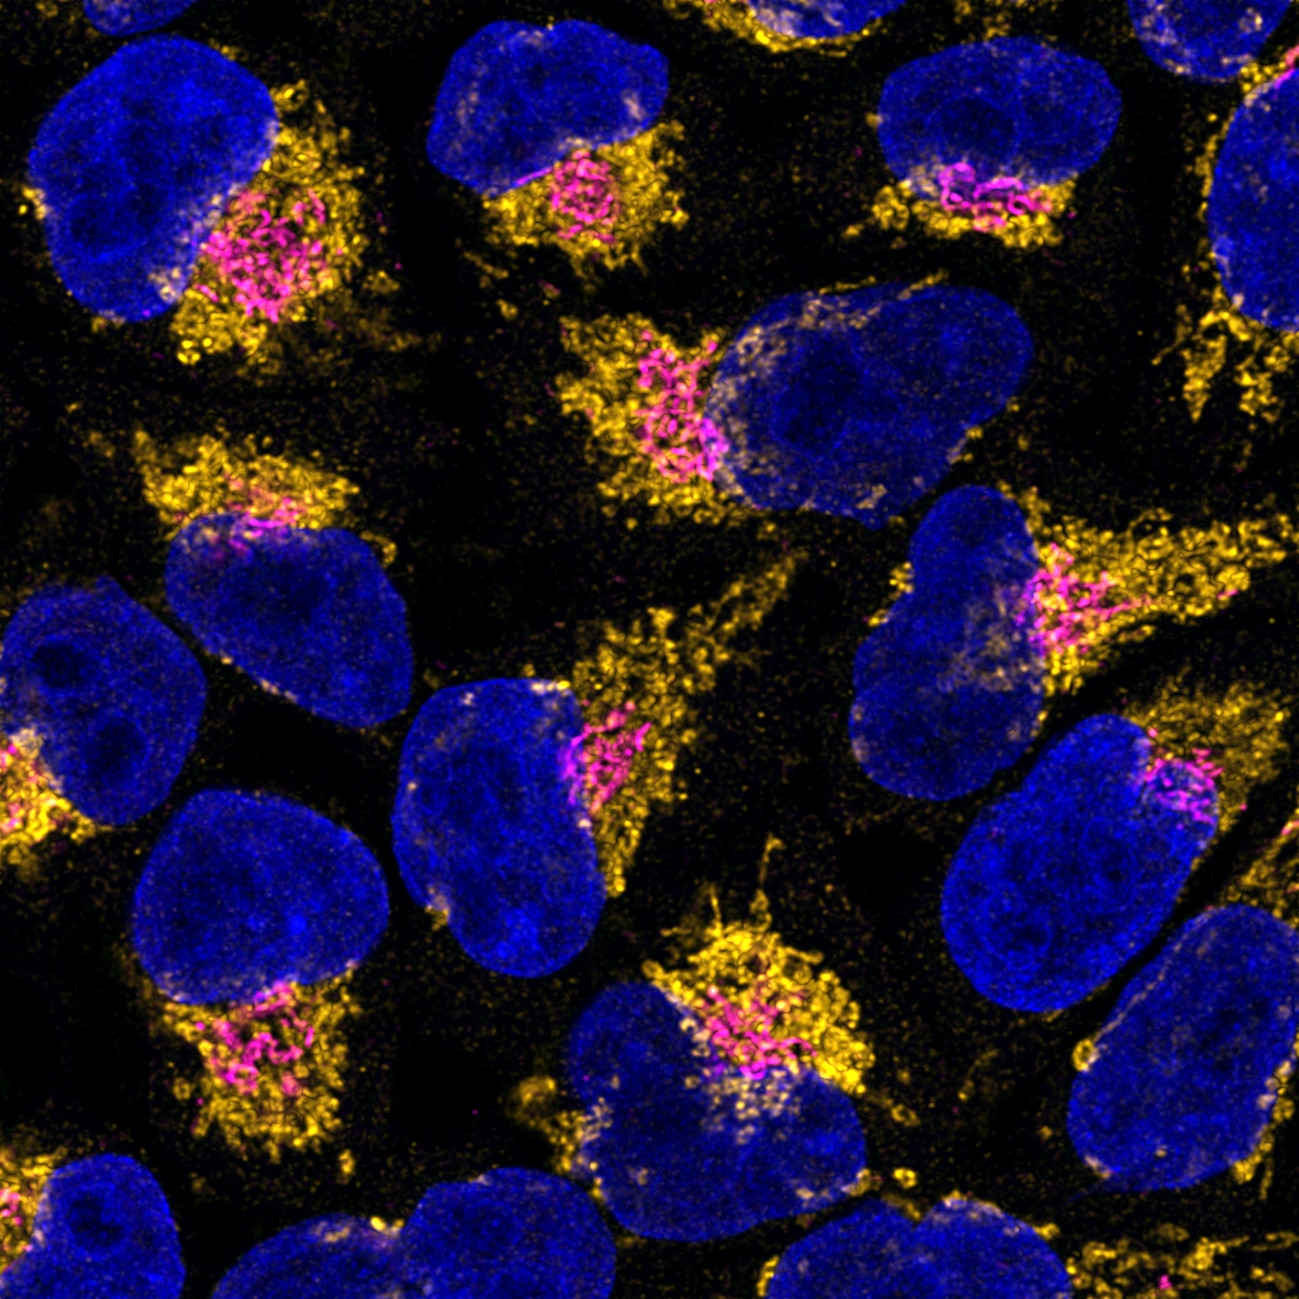 Immunofluorescence of HeLa: PFA-fixed HeLa cells were stained with anti-COXIV antibody (11242-1-AP) labeled with FlexAble CoraLite Plus 550 Kit (KFA002, yellow), anti-GM130 antibody (11308-1-AP) labeled with FlexAble CoraLite Plus 650 Kit (KFA003, magenta) and DAPI (blue). Confocal images were acquired with a 100x oil objective and post-processed. Images were recorded at the Core Facility Bioimaging at the Biomedical Center, LMU Munich.